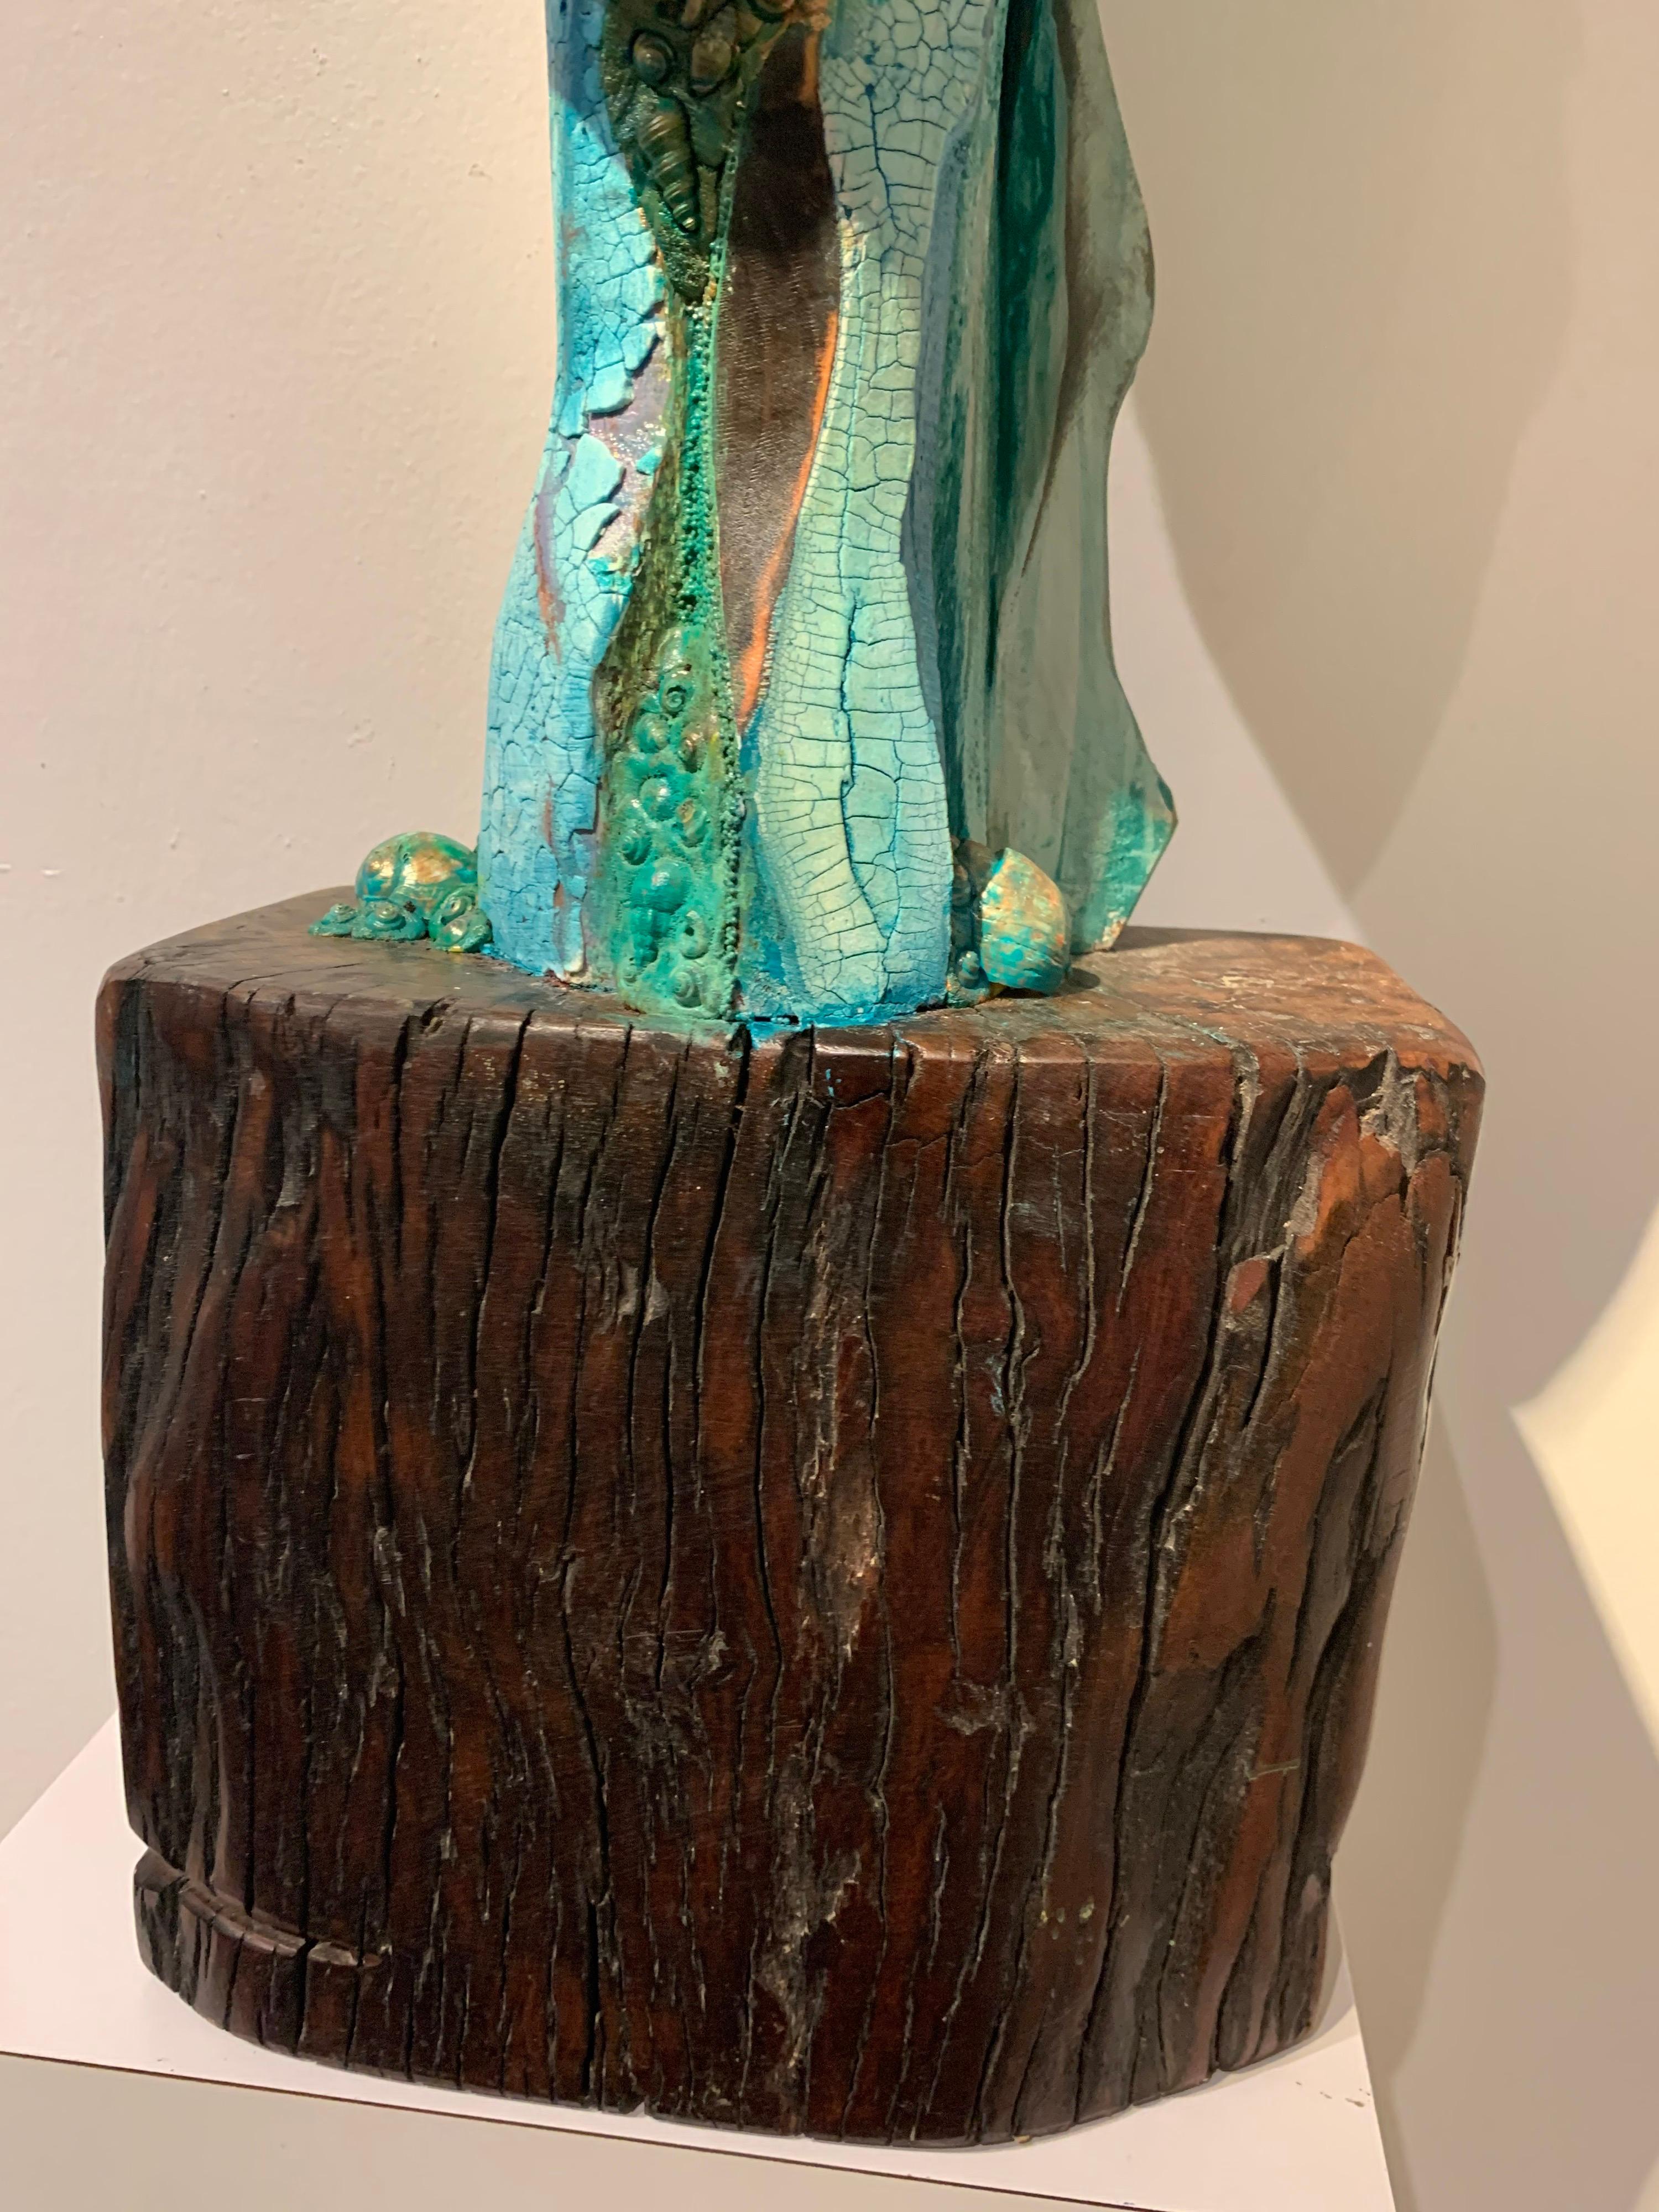 Listening, wood, acrylic, mixed media sculpture, green, blue, off white, brown 3